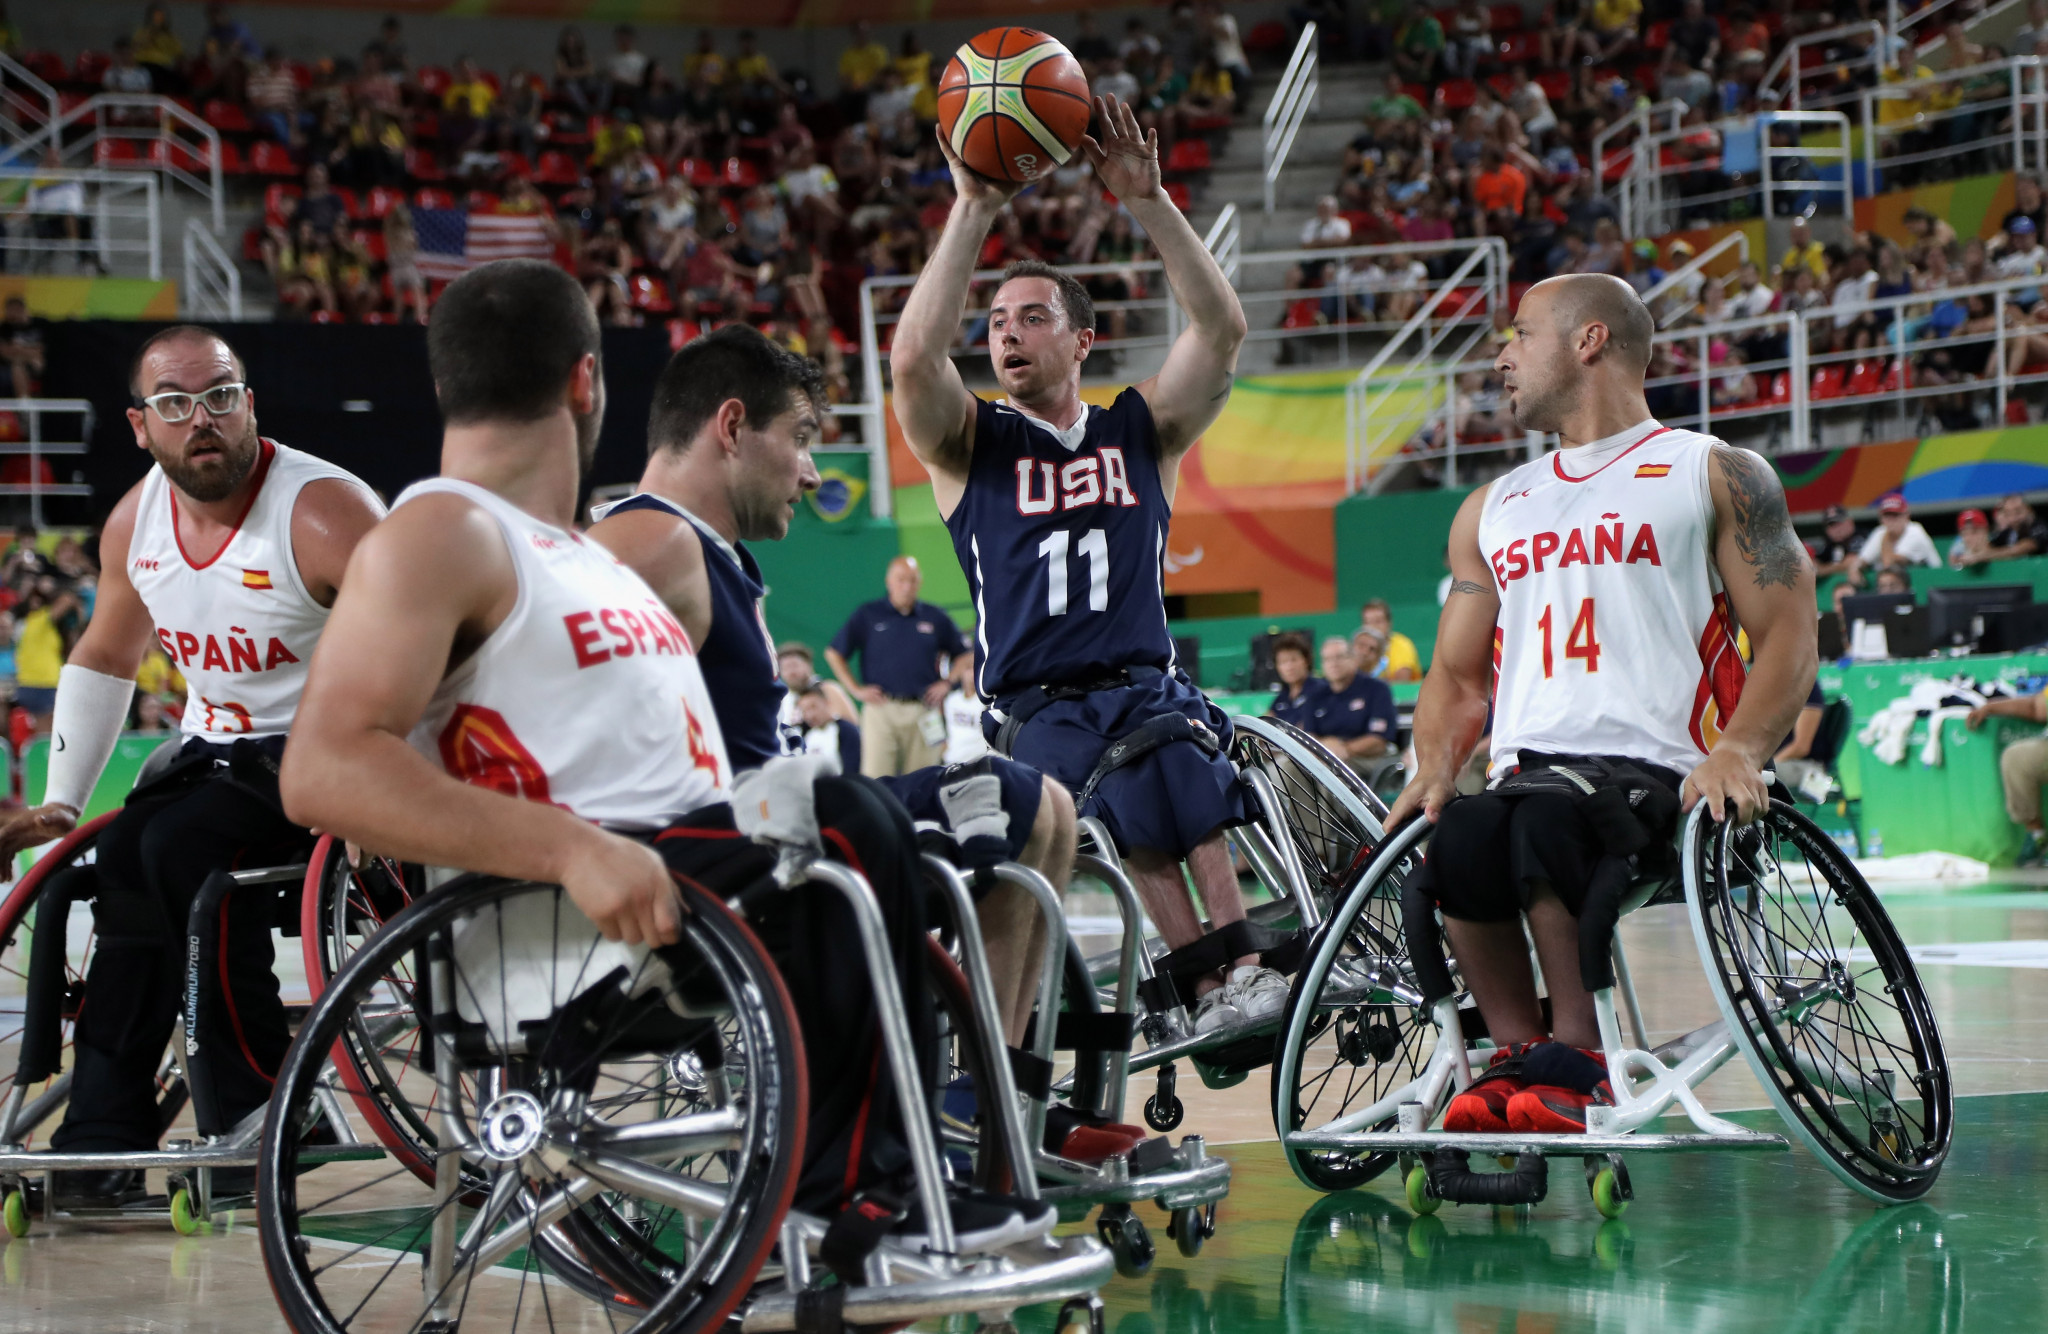 Steve Serio of the United States is pictured in possession during the Rio 2016 men's wheelchair basketball final ©Getty Images